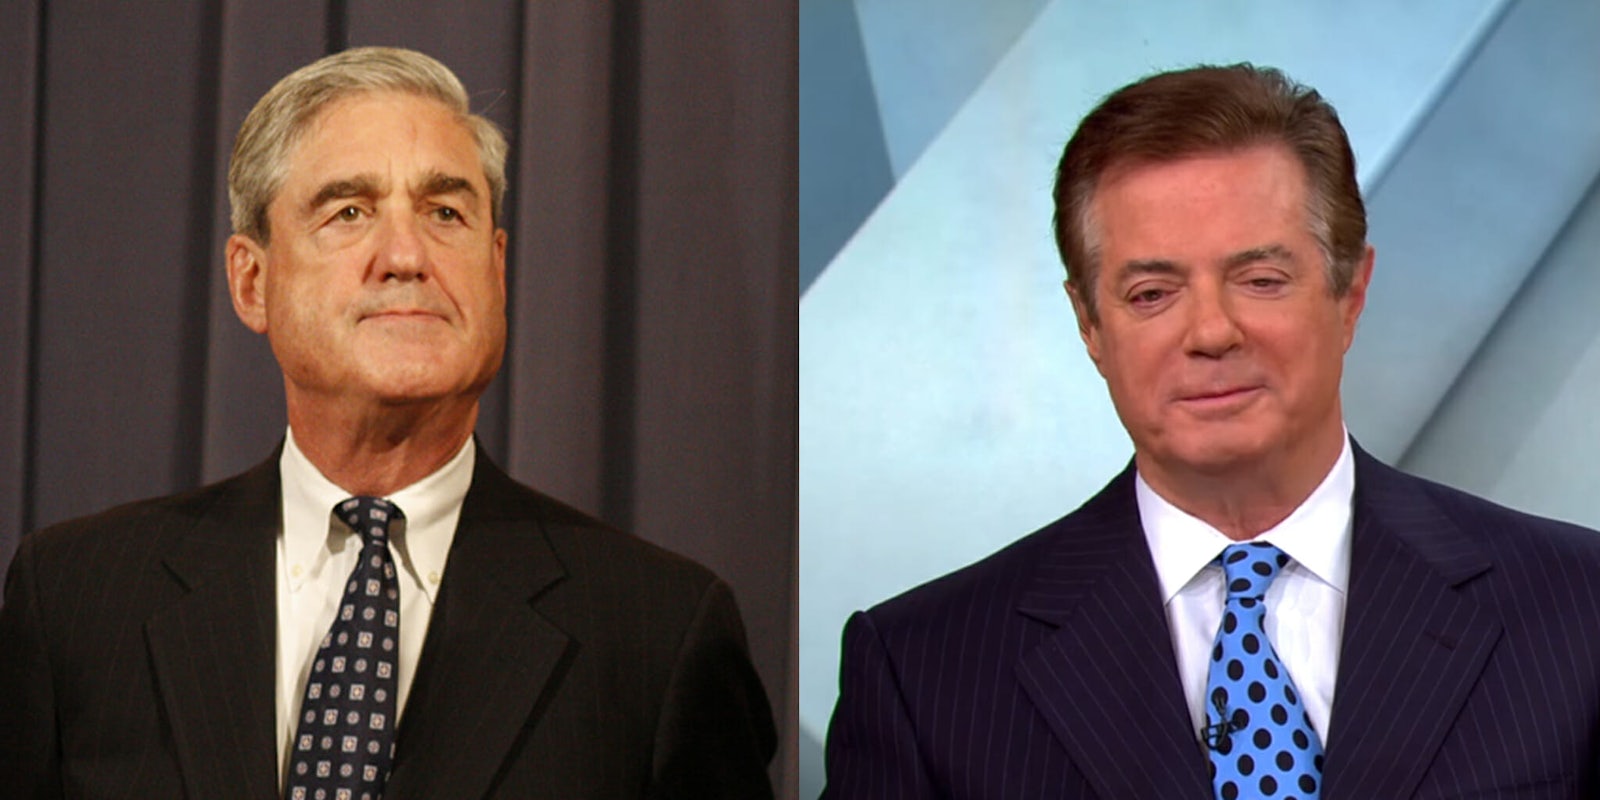 Paul Manafort will surrender to Special Counsel Robert Mueller's team on Monday, according to reports.